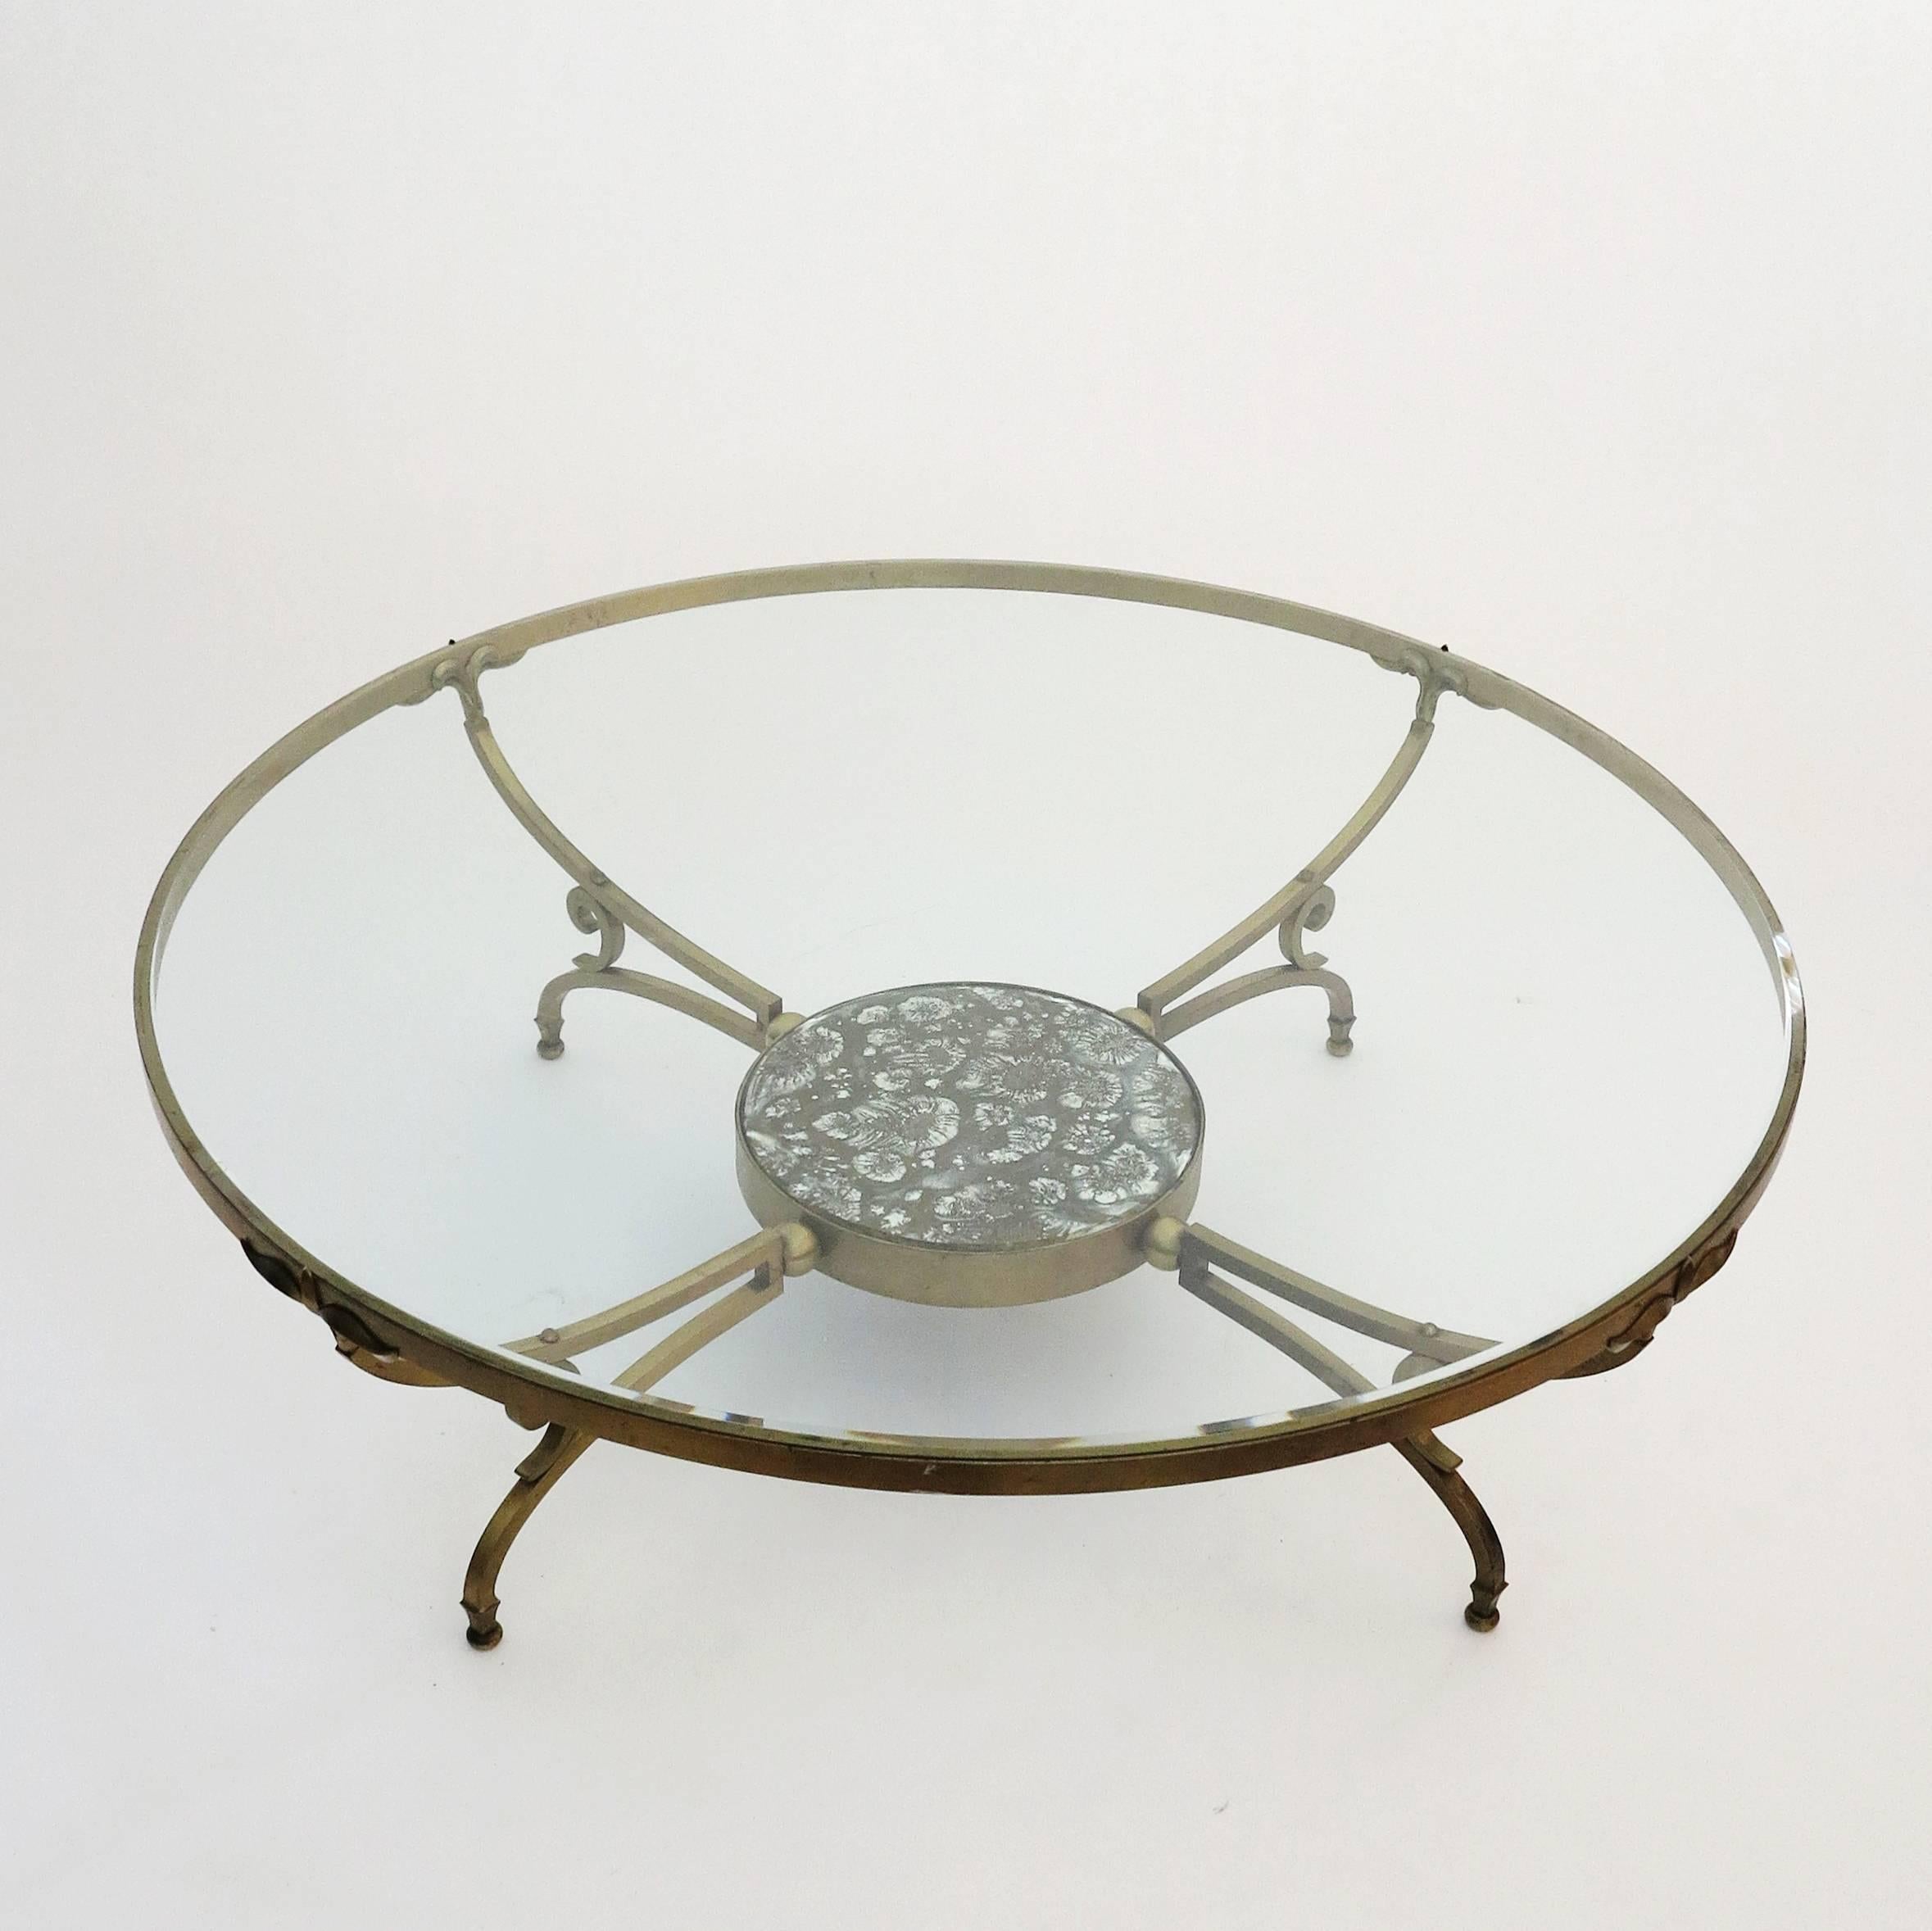 Luxurious round coffee table designed by Arturo Pani. Manufactured in solid bronze and beveled glass with an elegant églomisé glass detail in the lower level.